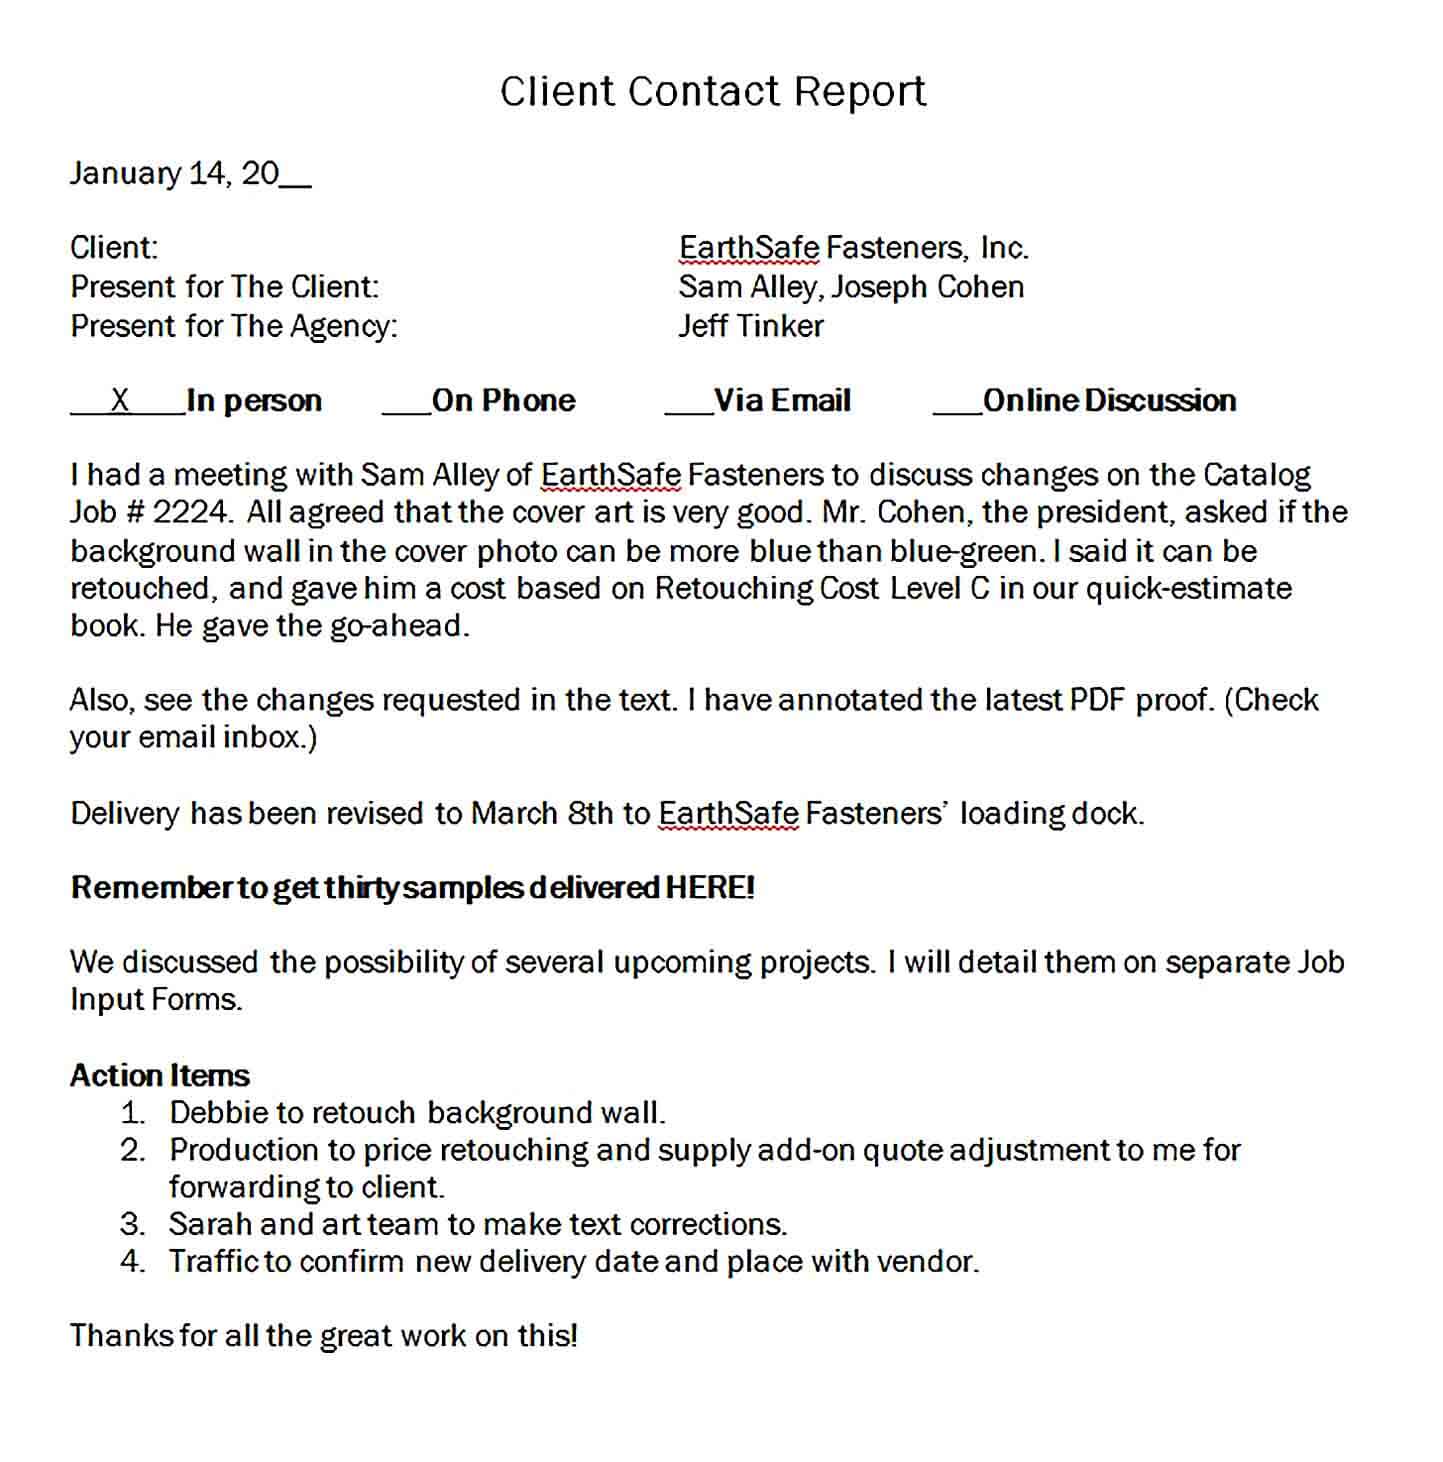 Sample Client Contact Report 1